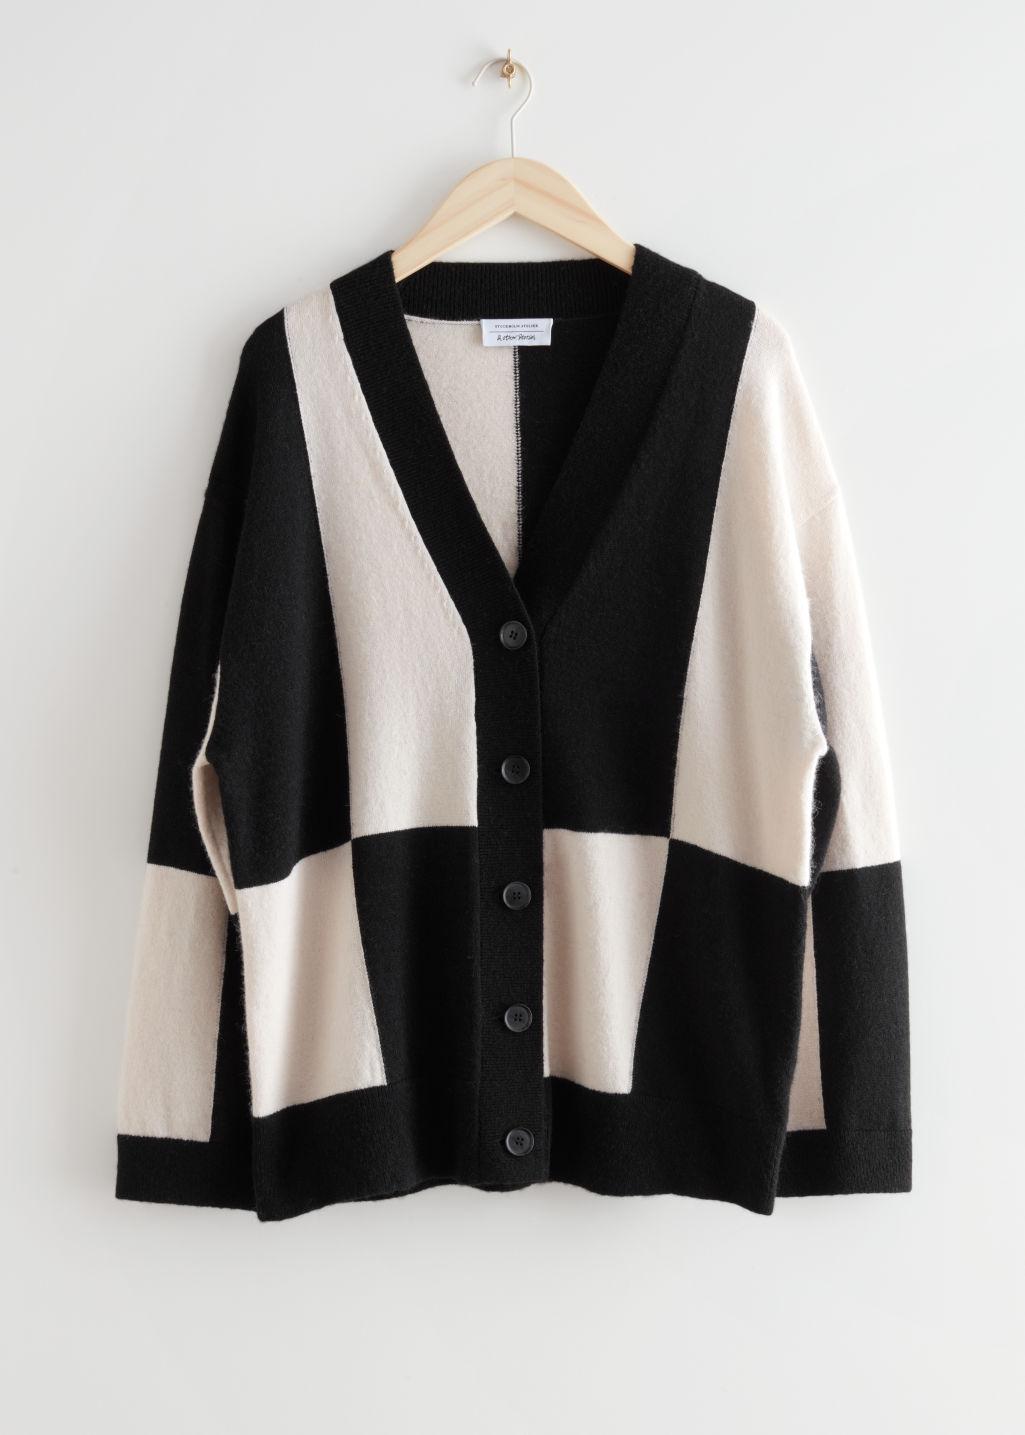 & Other Stories Oversized Colour Block Cardigan in Black | Lyst